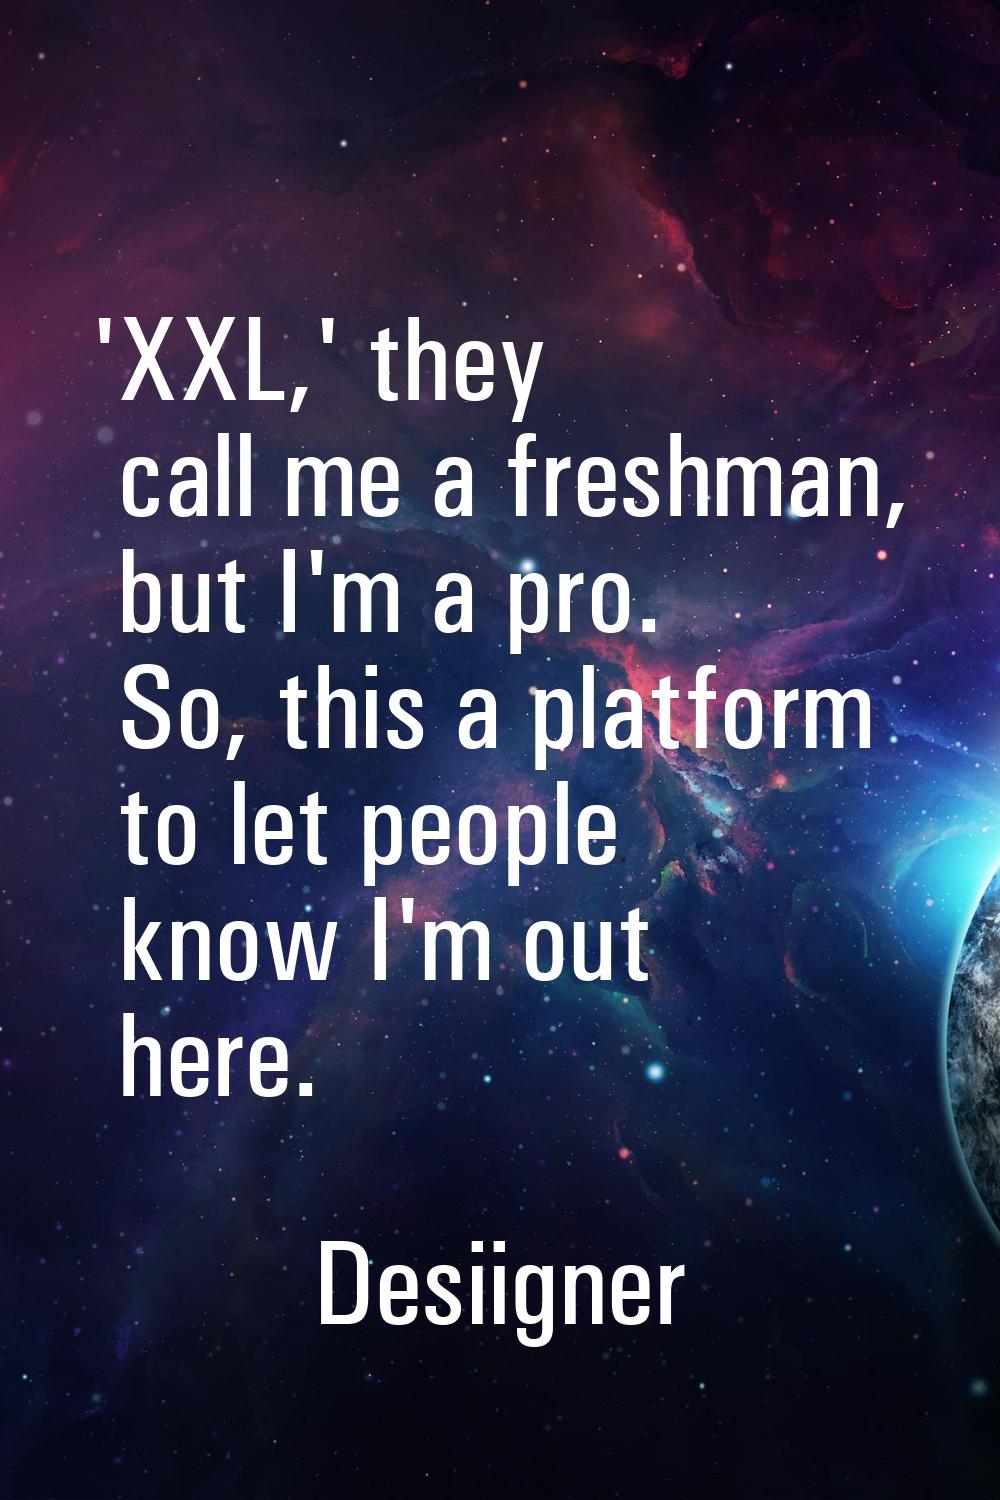 'XXL,' they call me a freshman, but I'm a pro. So, this a platform to let people know I'm out here.